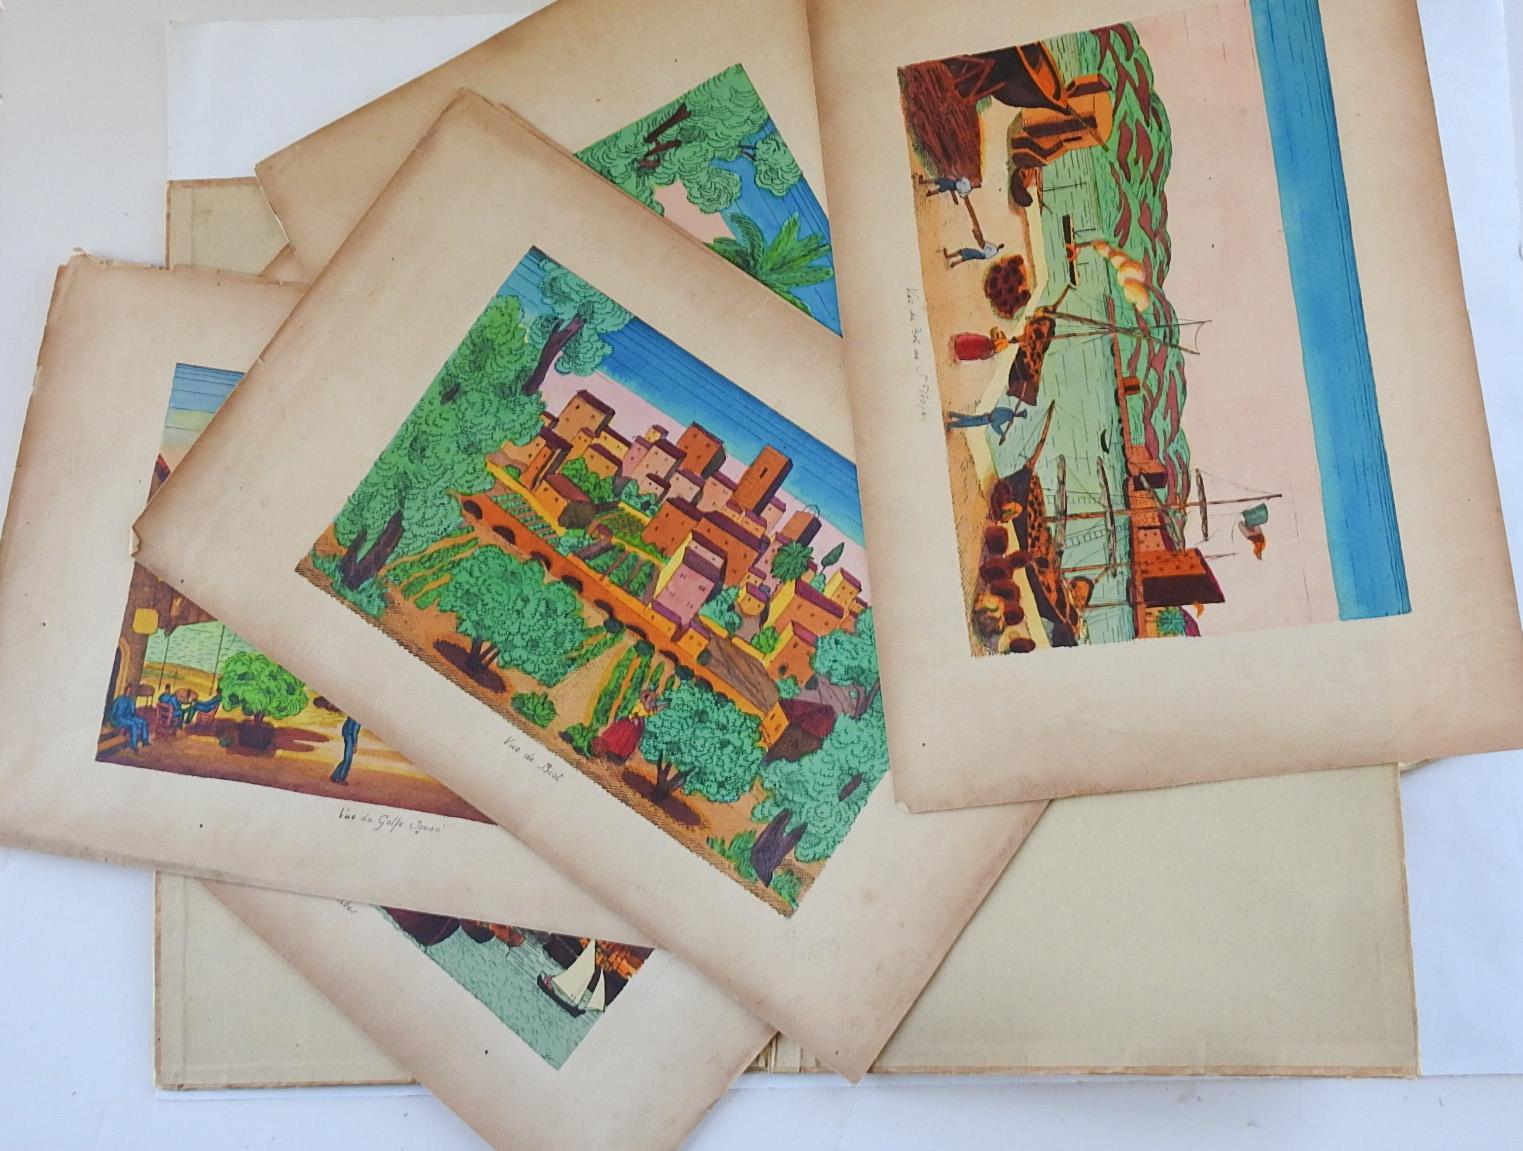 Vintage portfolio of views of Provence serigraph prints. 7 Colorful prints loose leaf in paper covered portfolio, age toning, edge discoloration and edge tears.